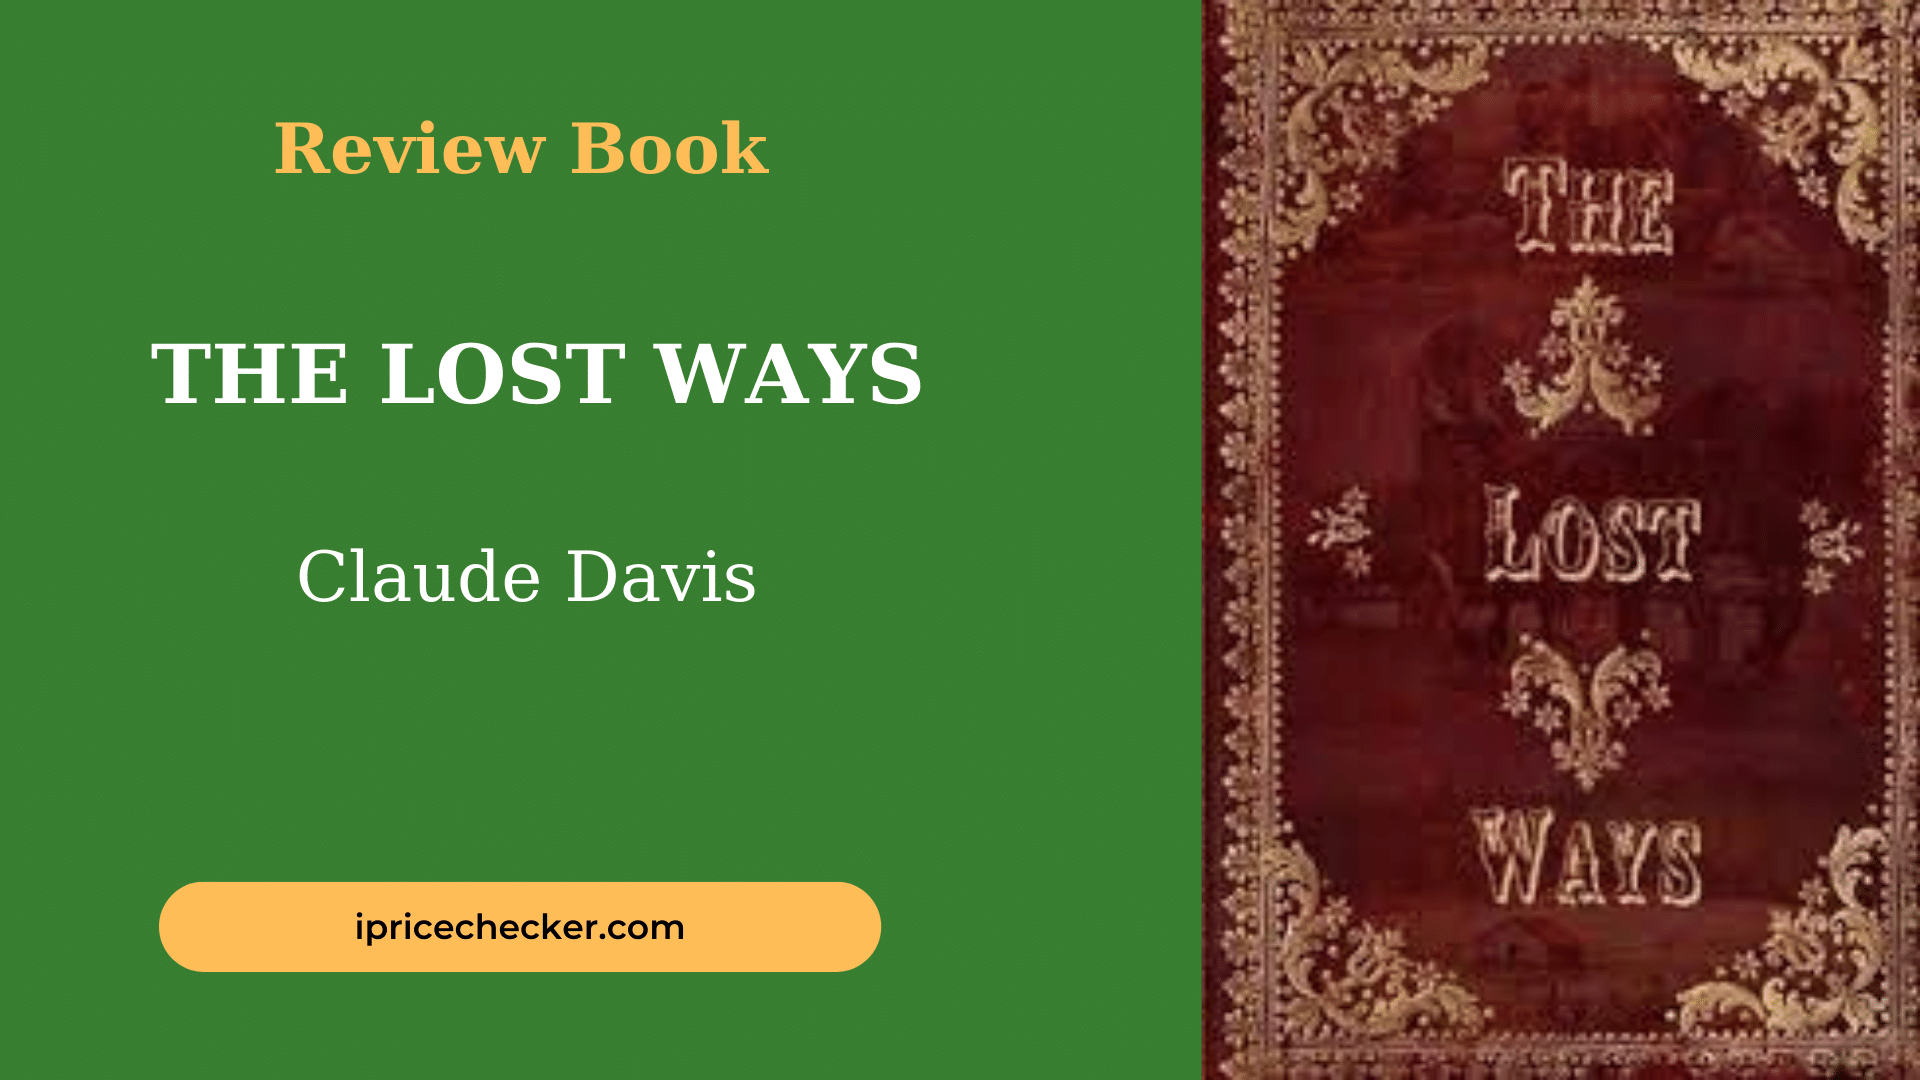 The lost ways book review